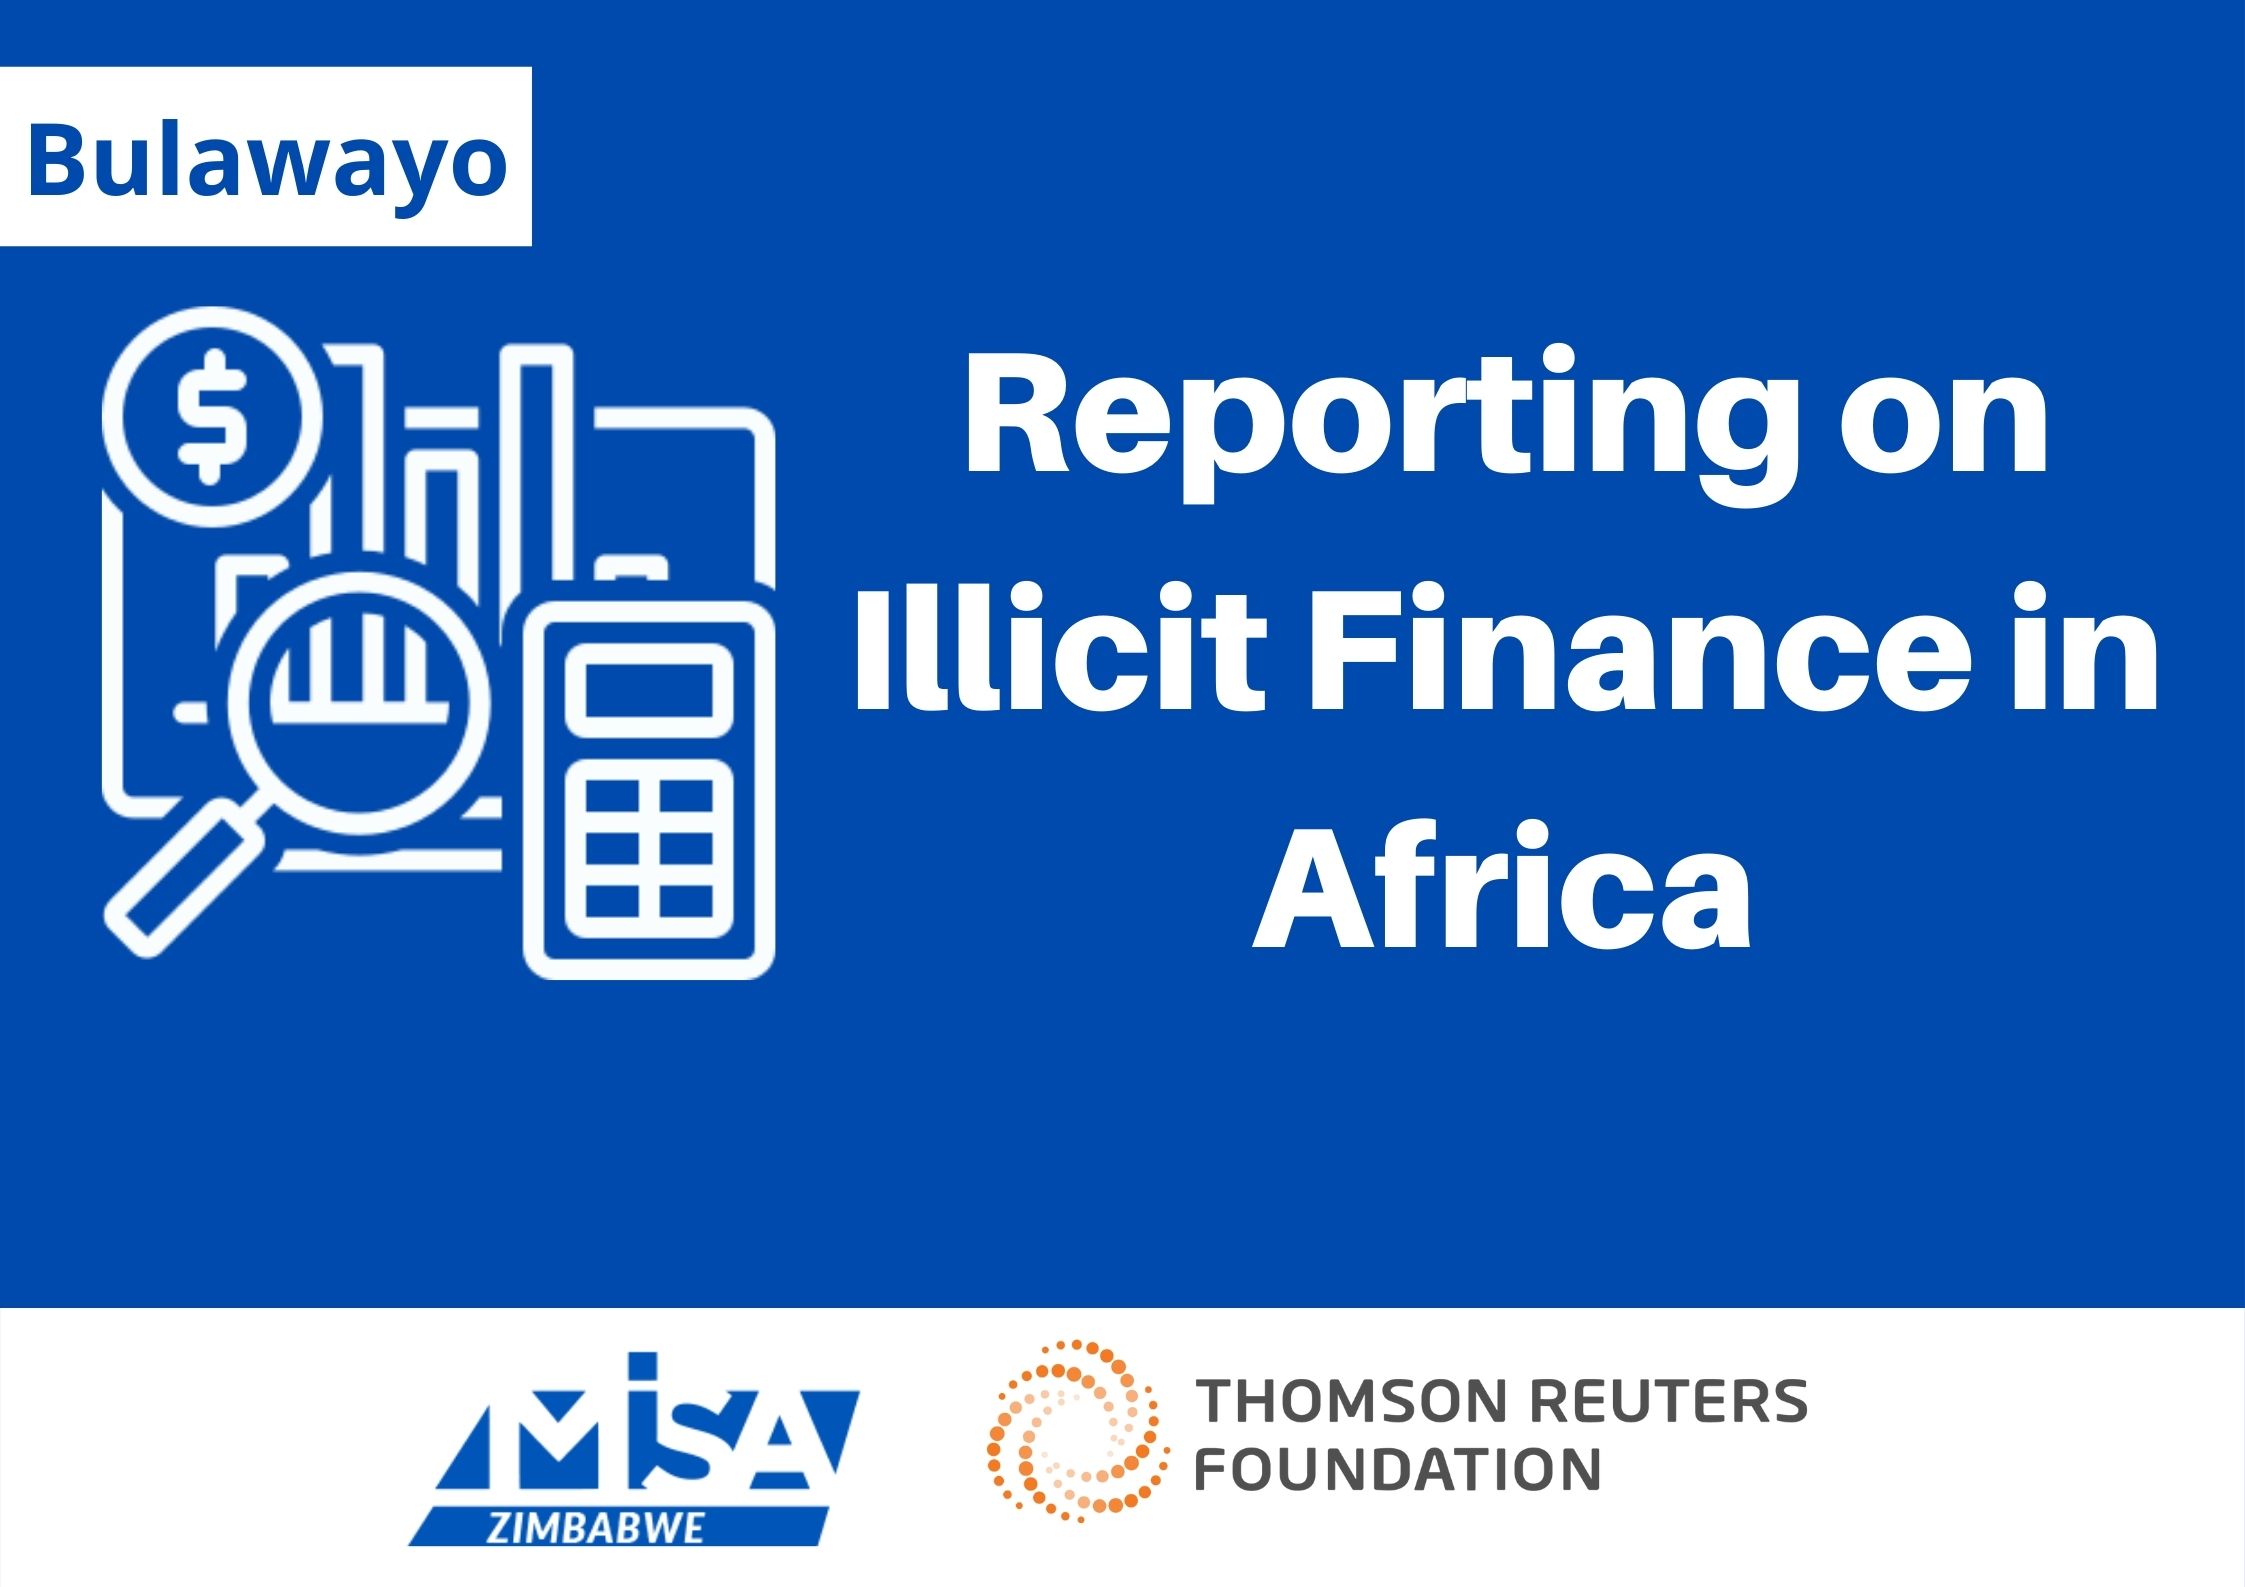 Reporting on Illicit Finance in Africa (Bulawayo)